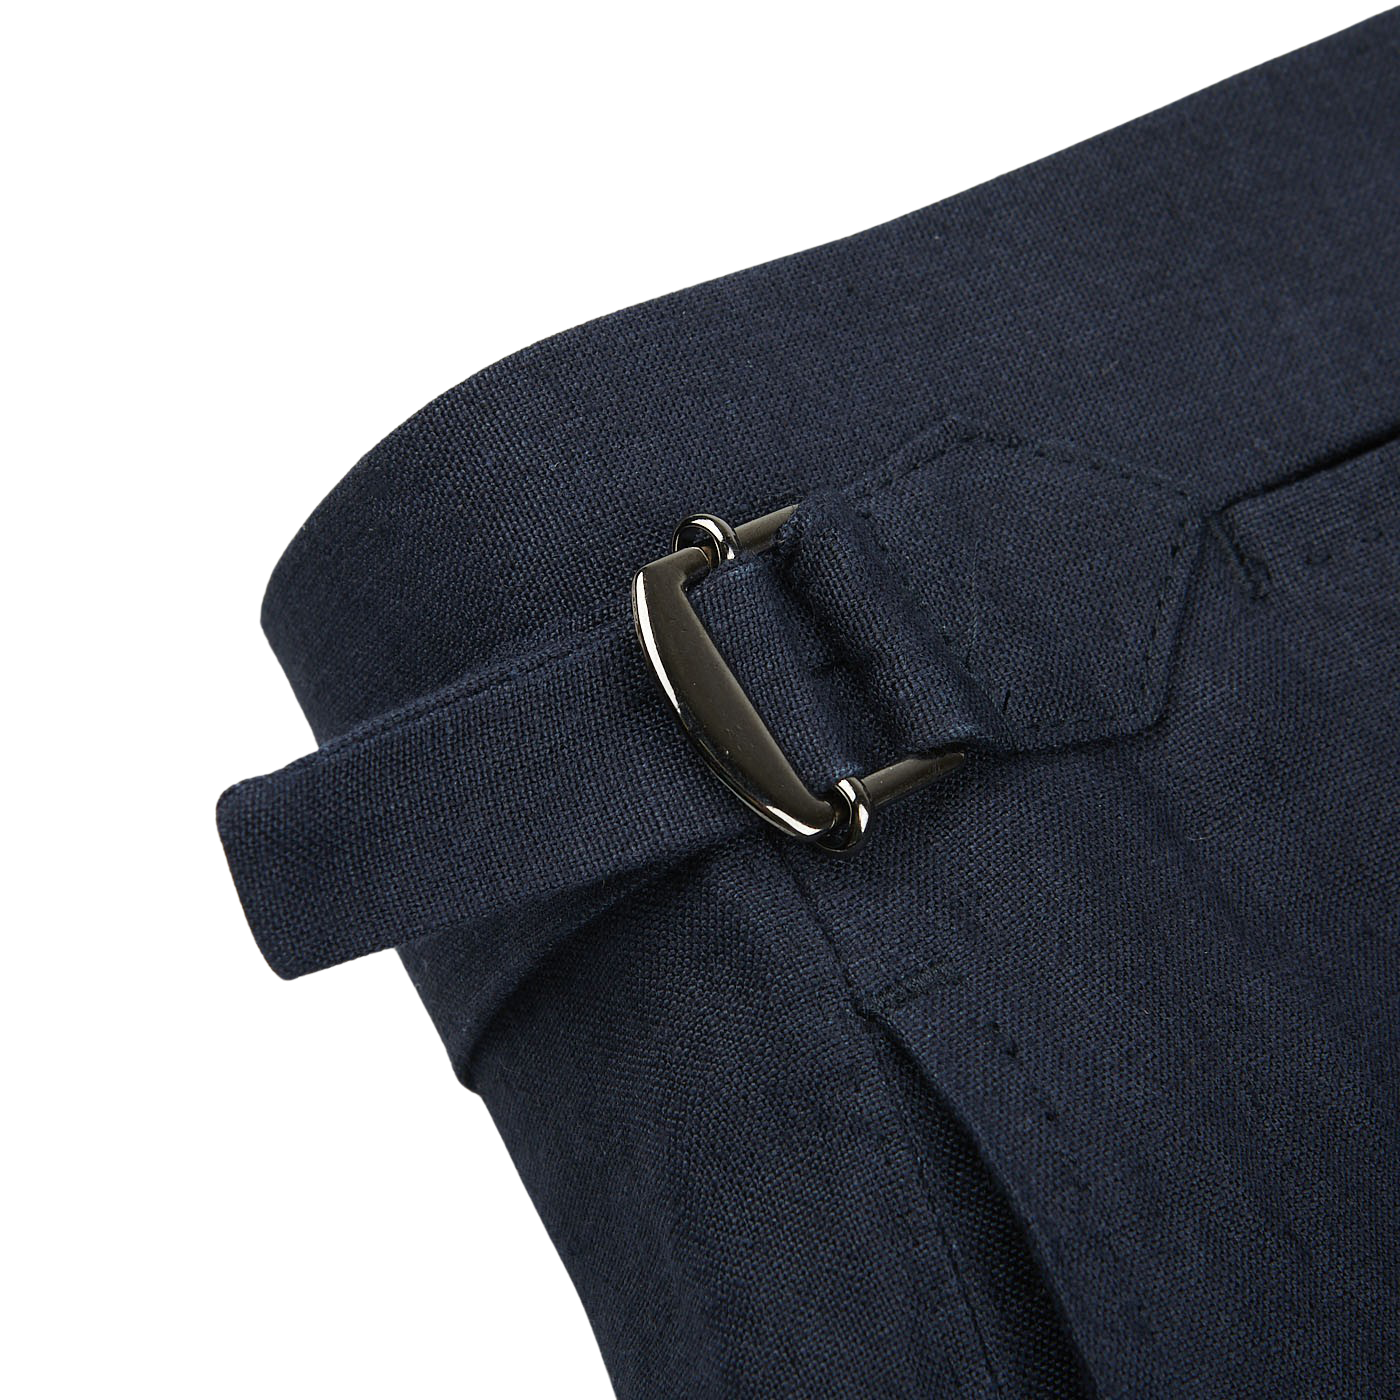 These Navy Blue Pure Linen Flat Front Trousers from Baltzar Sartorial have a metal buckle for a tailored fit.